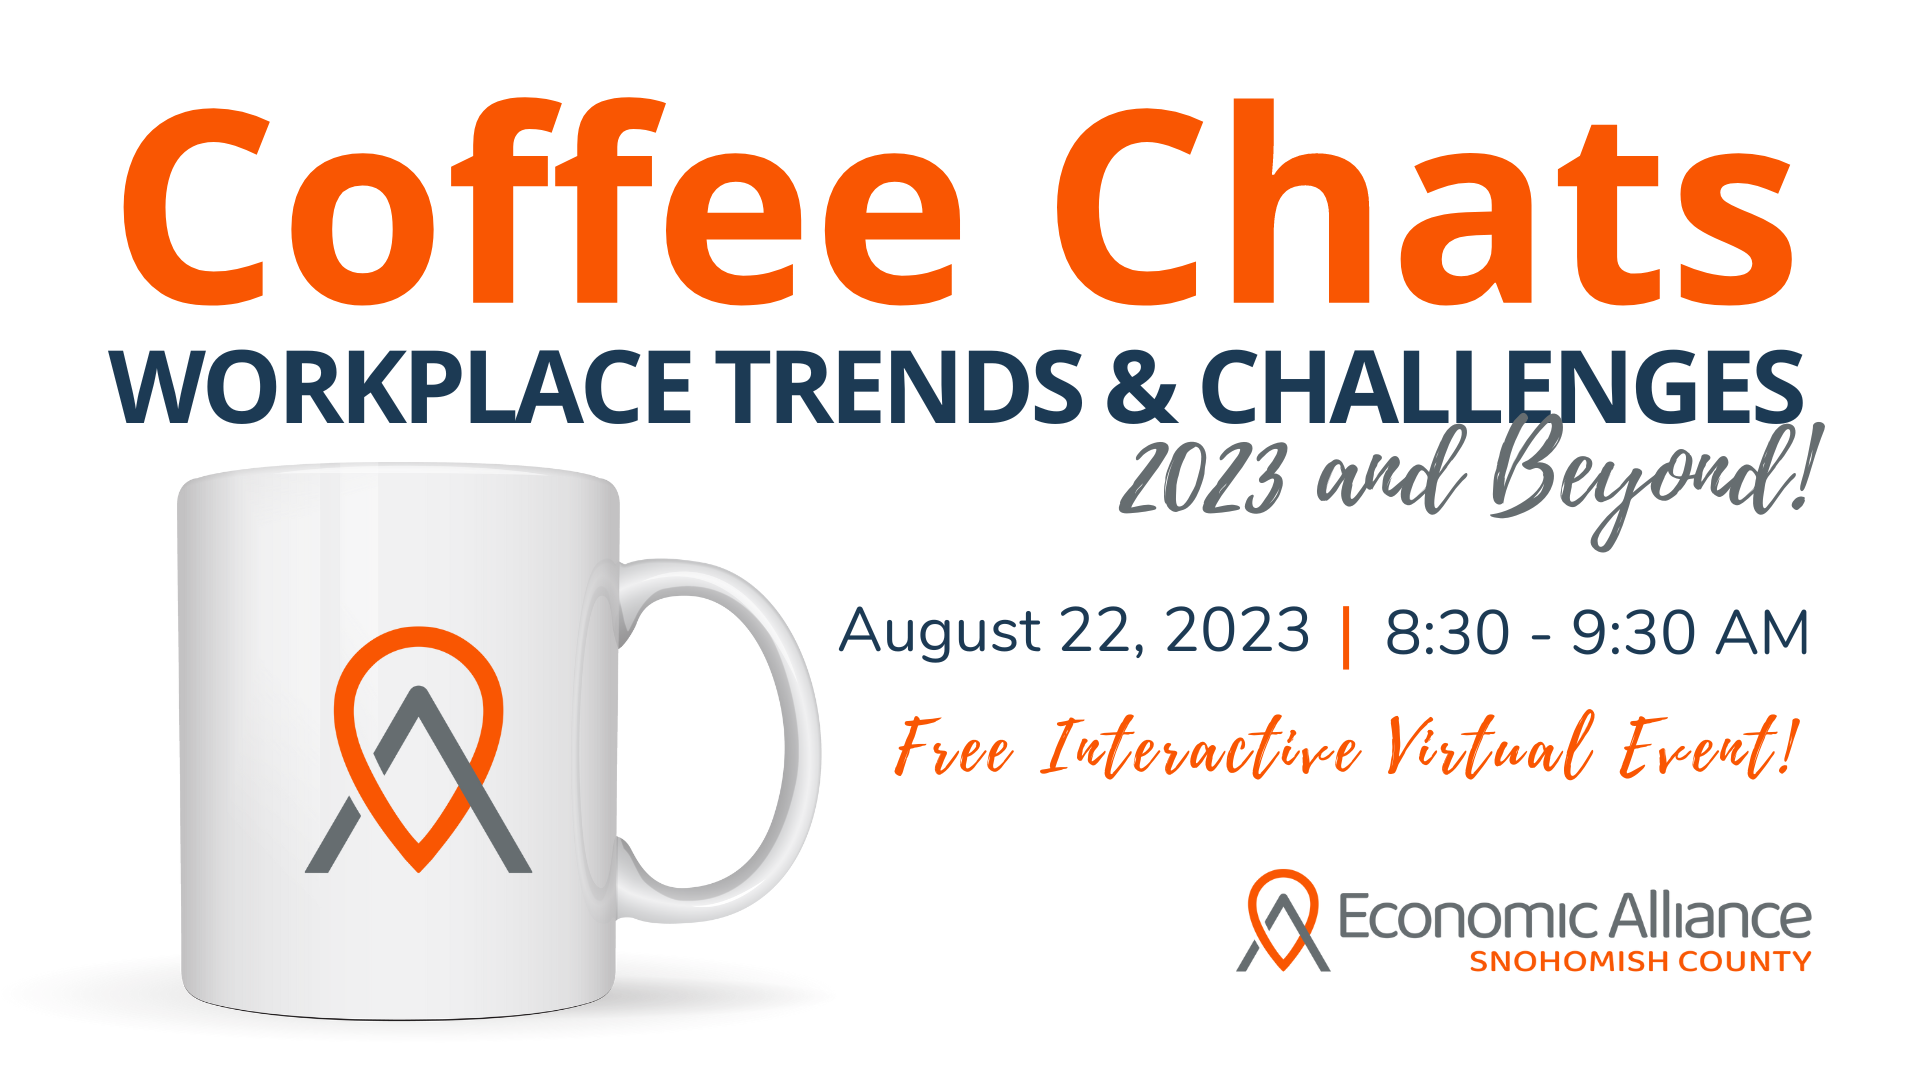 Event Promo Photo For Coffee Chats - Workplace Trends & Challenges: 2023 & Beyond!